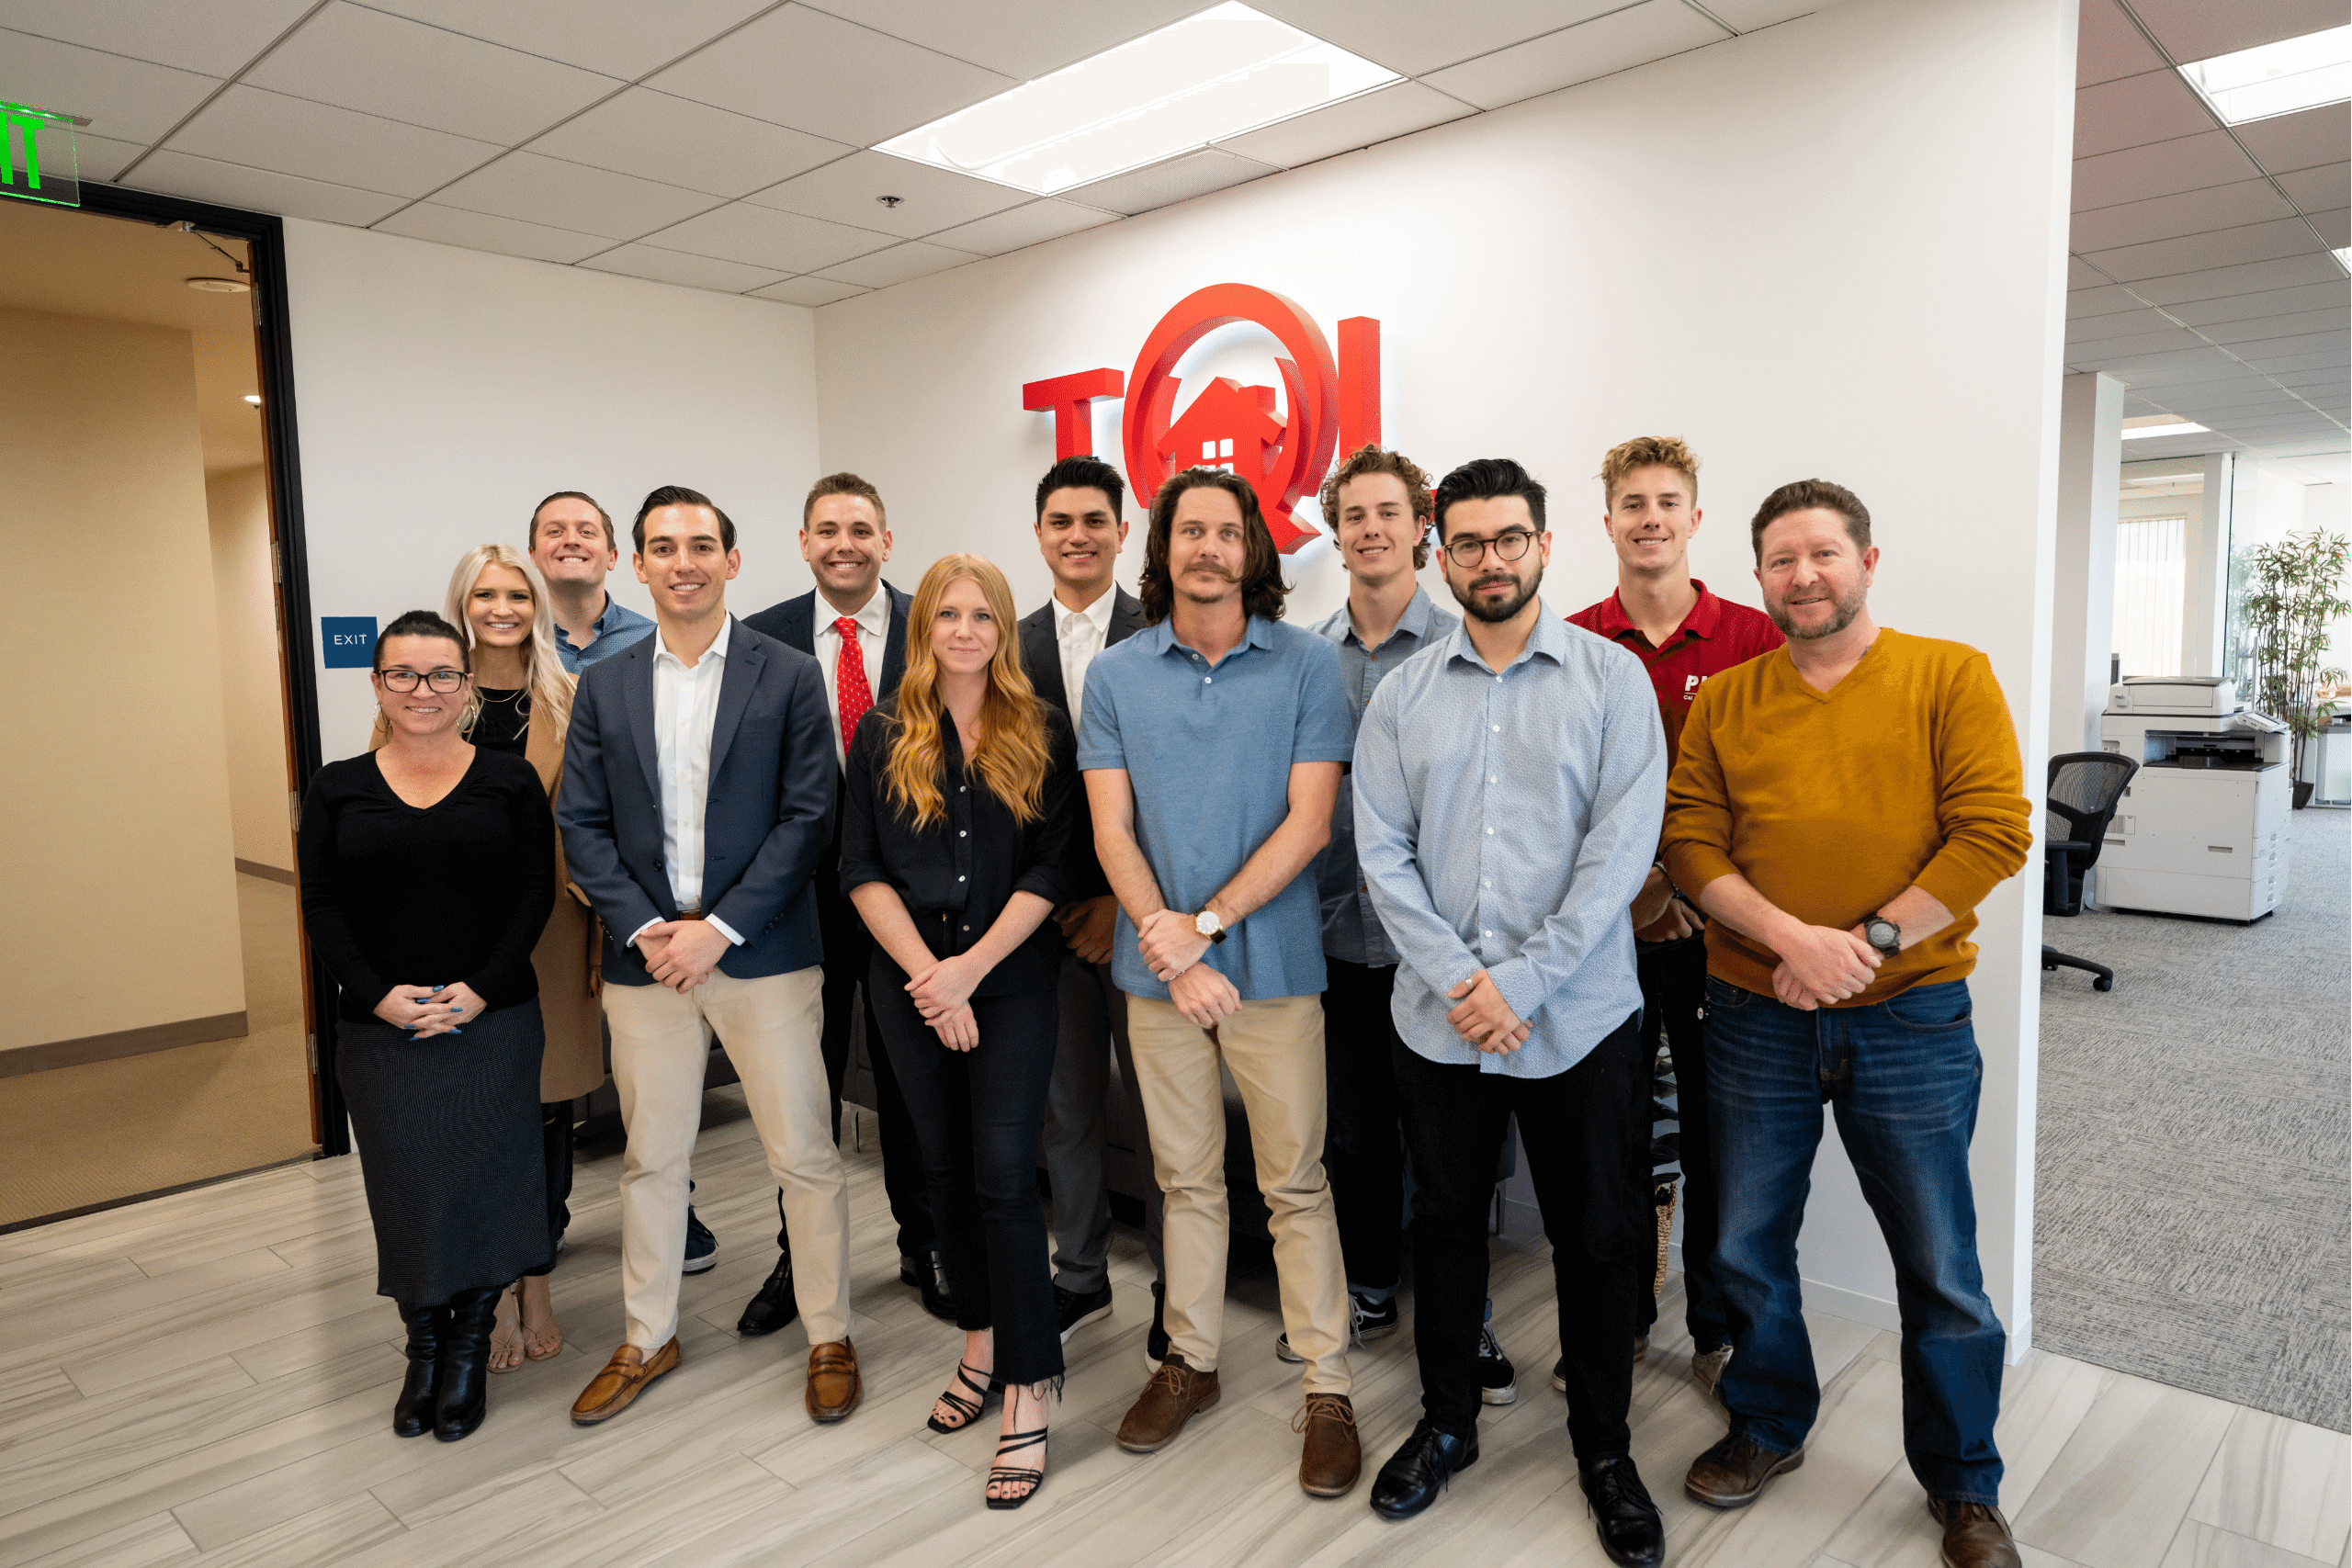 Employee Spotlight: Why Is TQL a Great Place To Work?